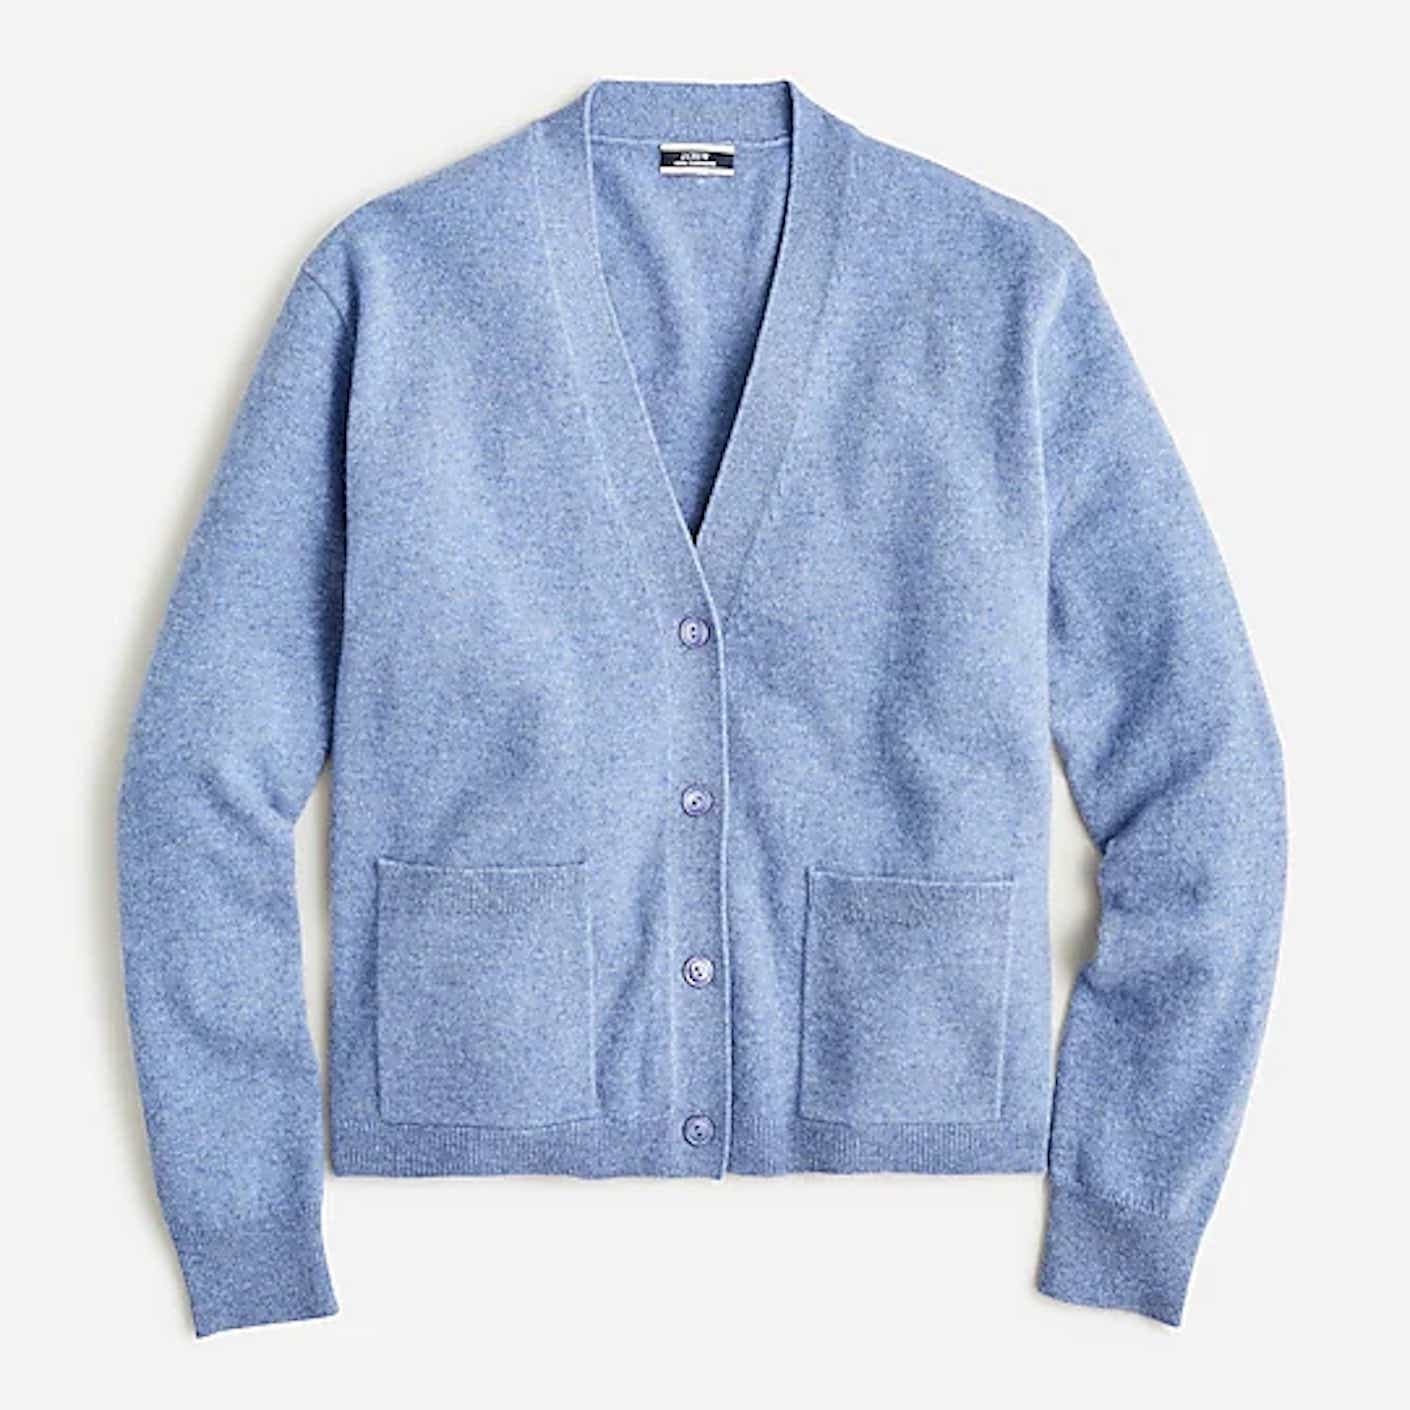 A fitted, button down, hip length blue cardigan with long sleeves lies flat.